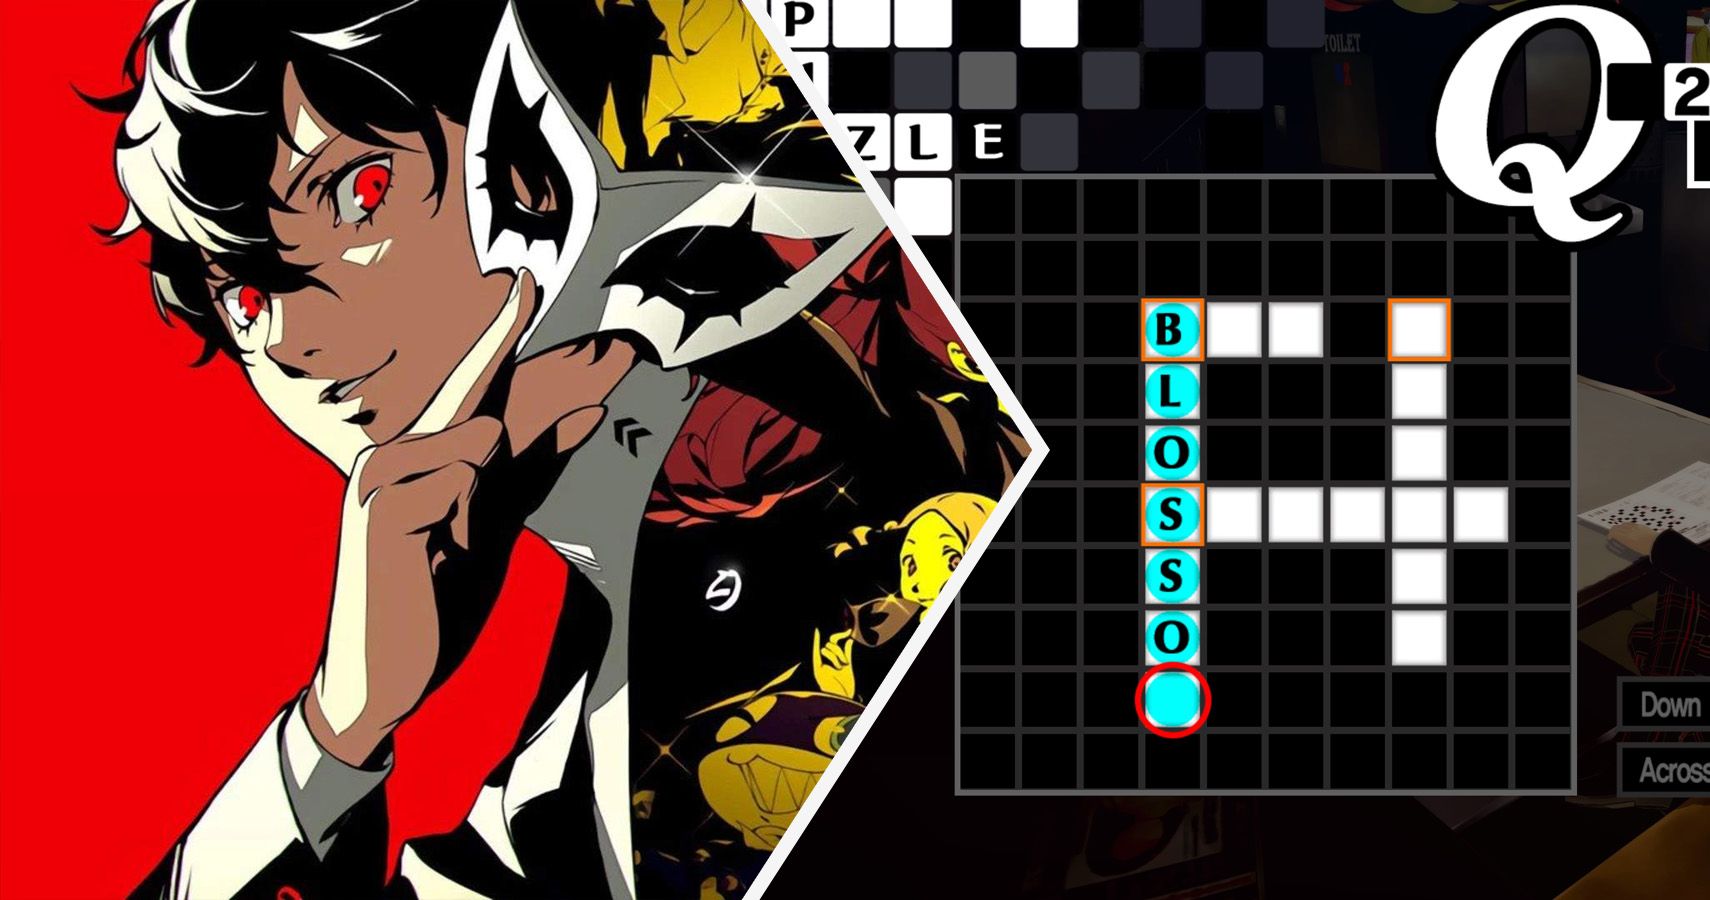 Persona 5 Royal Crossword Collage